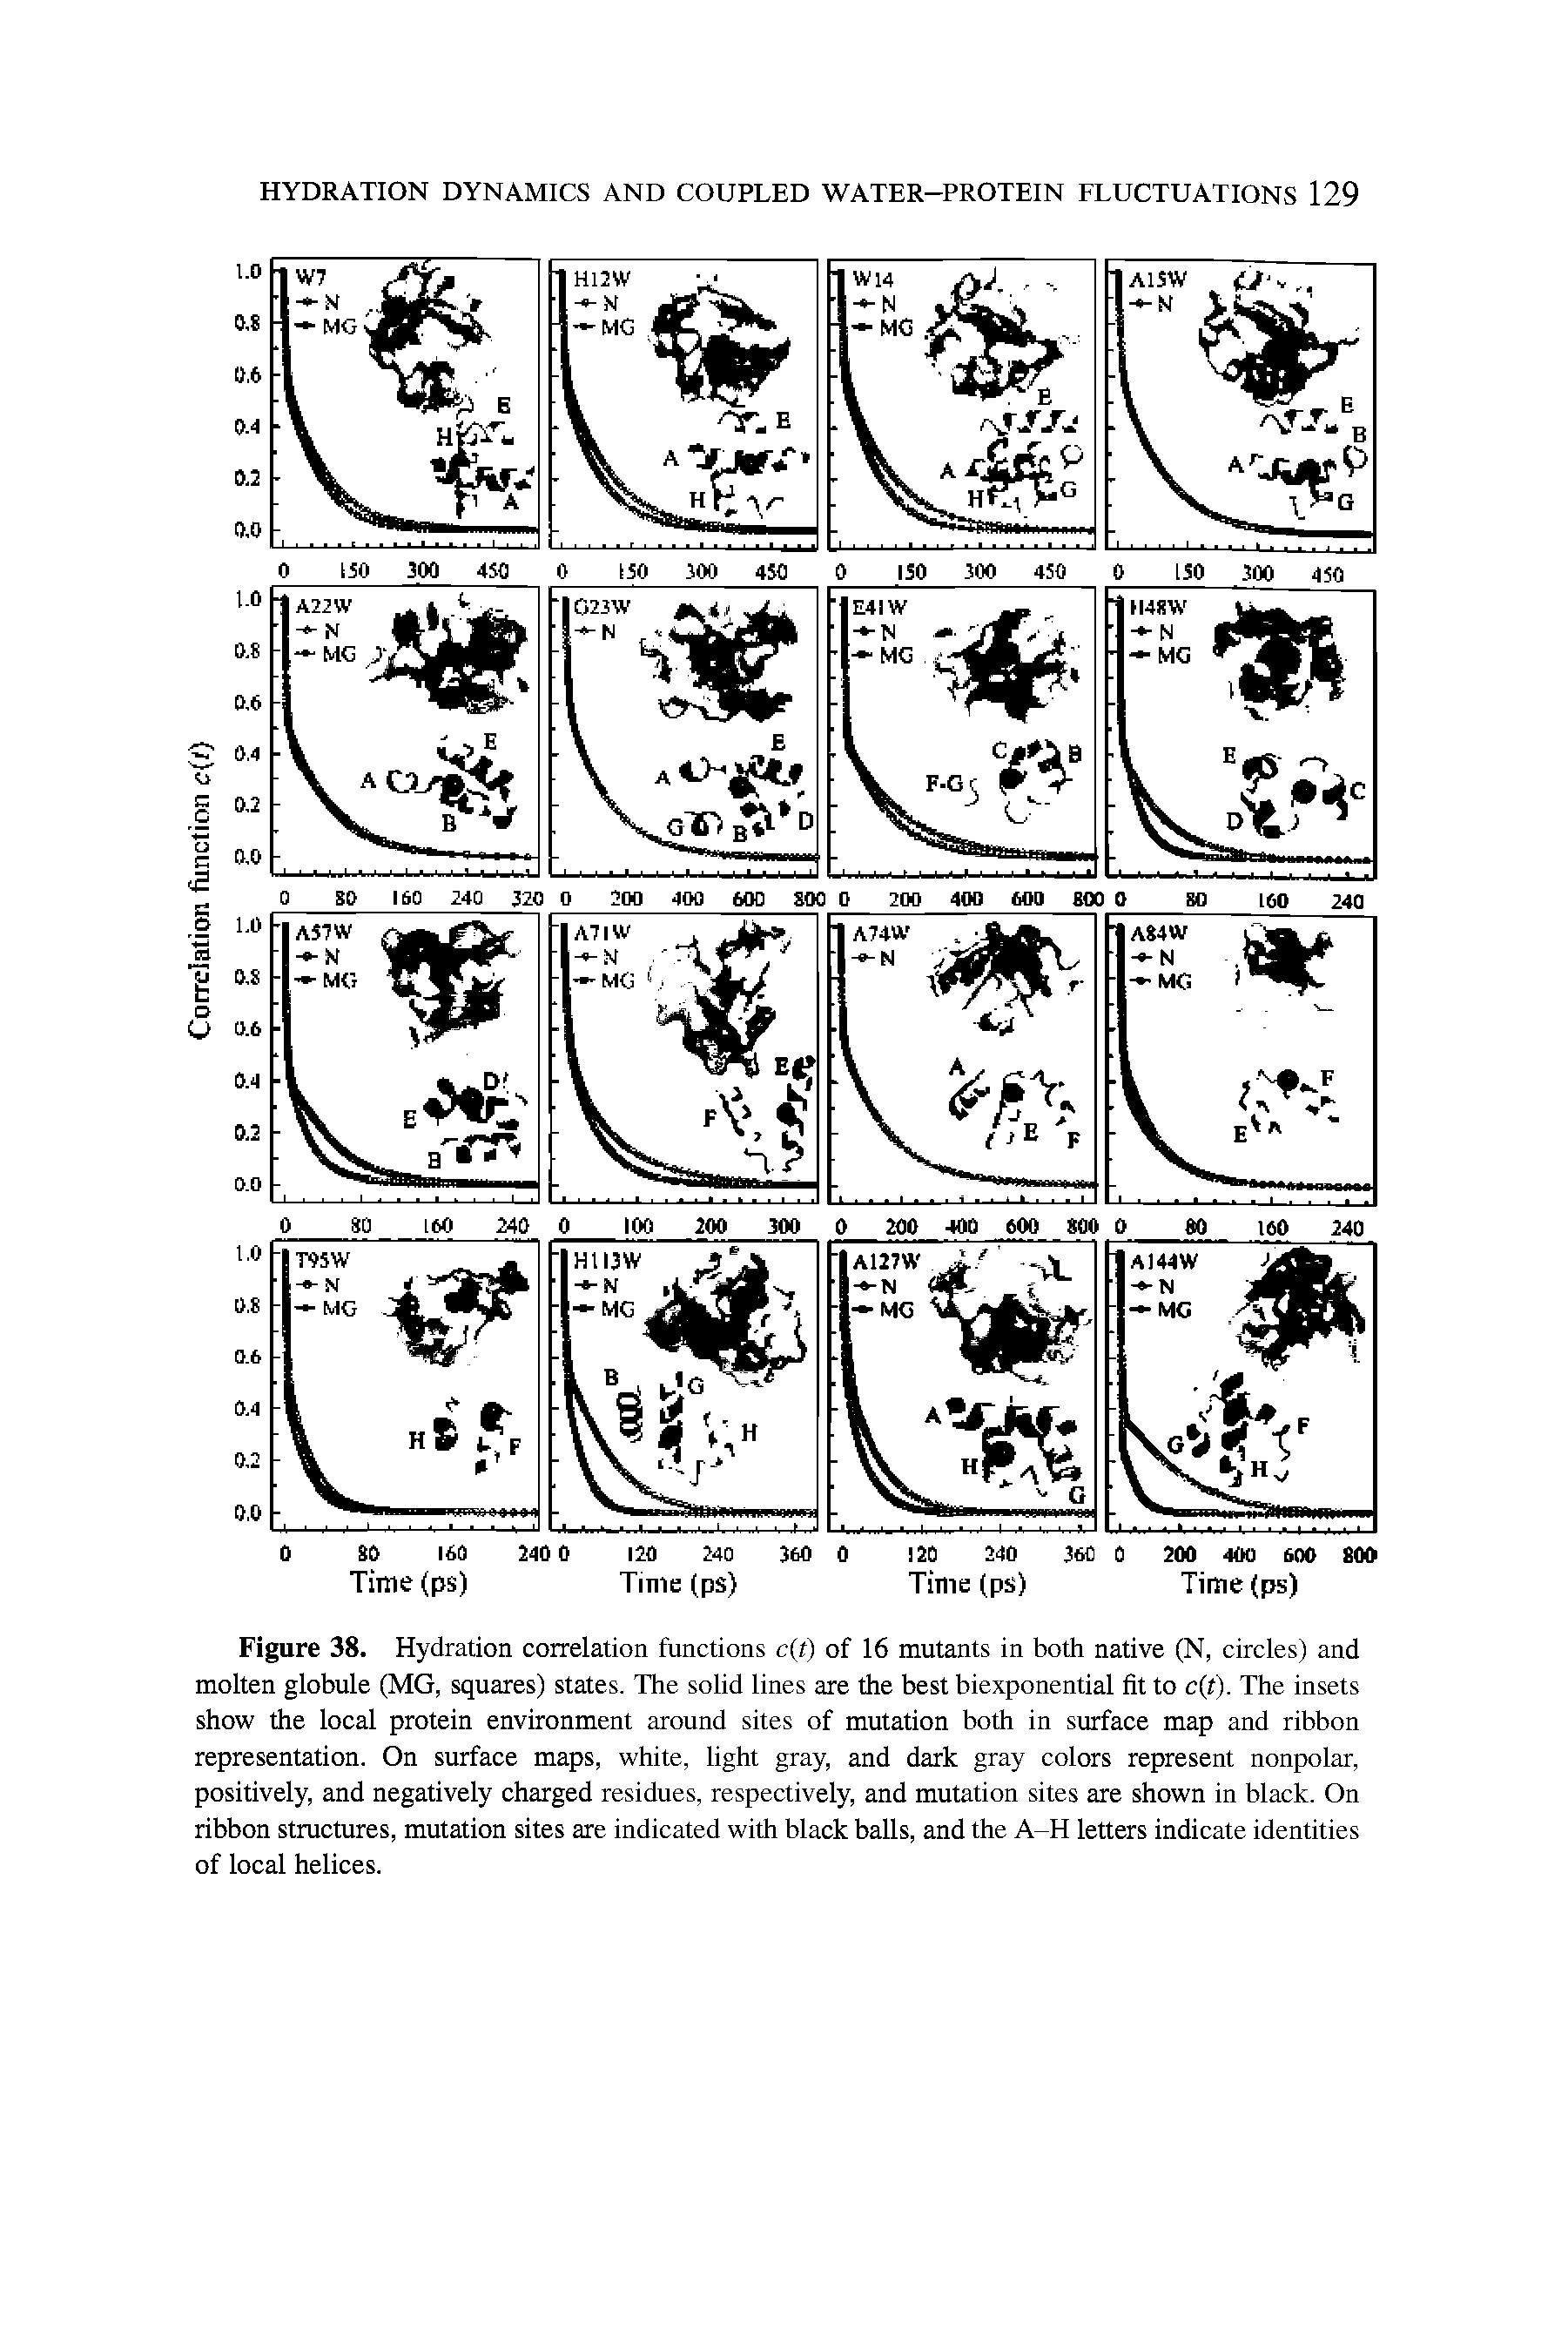 Figure 38. Hydration correlation functions c(t) of 16 mutants in both native (N, circles) and molten globule (MG, squares) states. The solid lines are the best biexponential fit to c t). The insets show the local protein environment around sites of mutation both in surface map and ribbon representation. On surface maps, white, light gray, and dark gray colors represent nonpolar, positively, and negatively charged residues, respectively, and mutation sites are shown in black. On ribbon structures, mutation sites are indicated with black balls, and the A-H letters indicate identities of local helices.